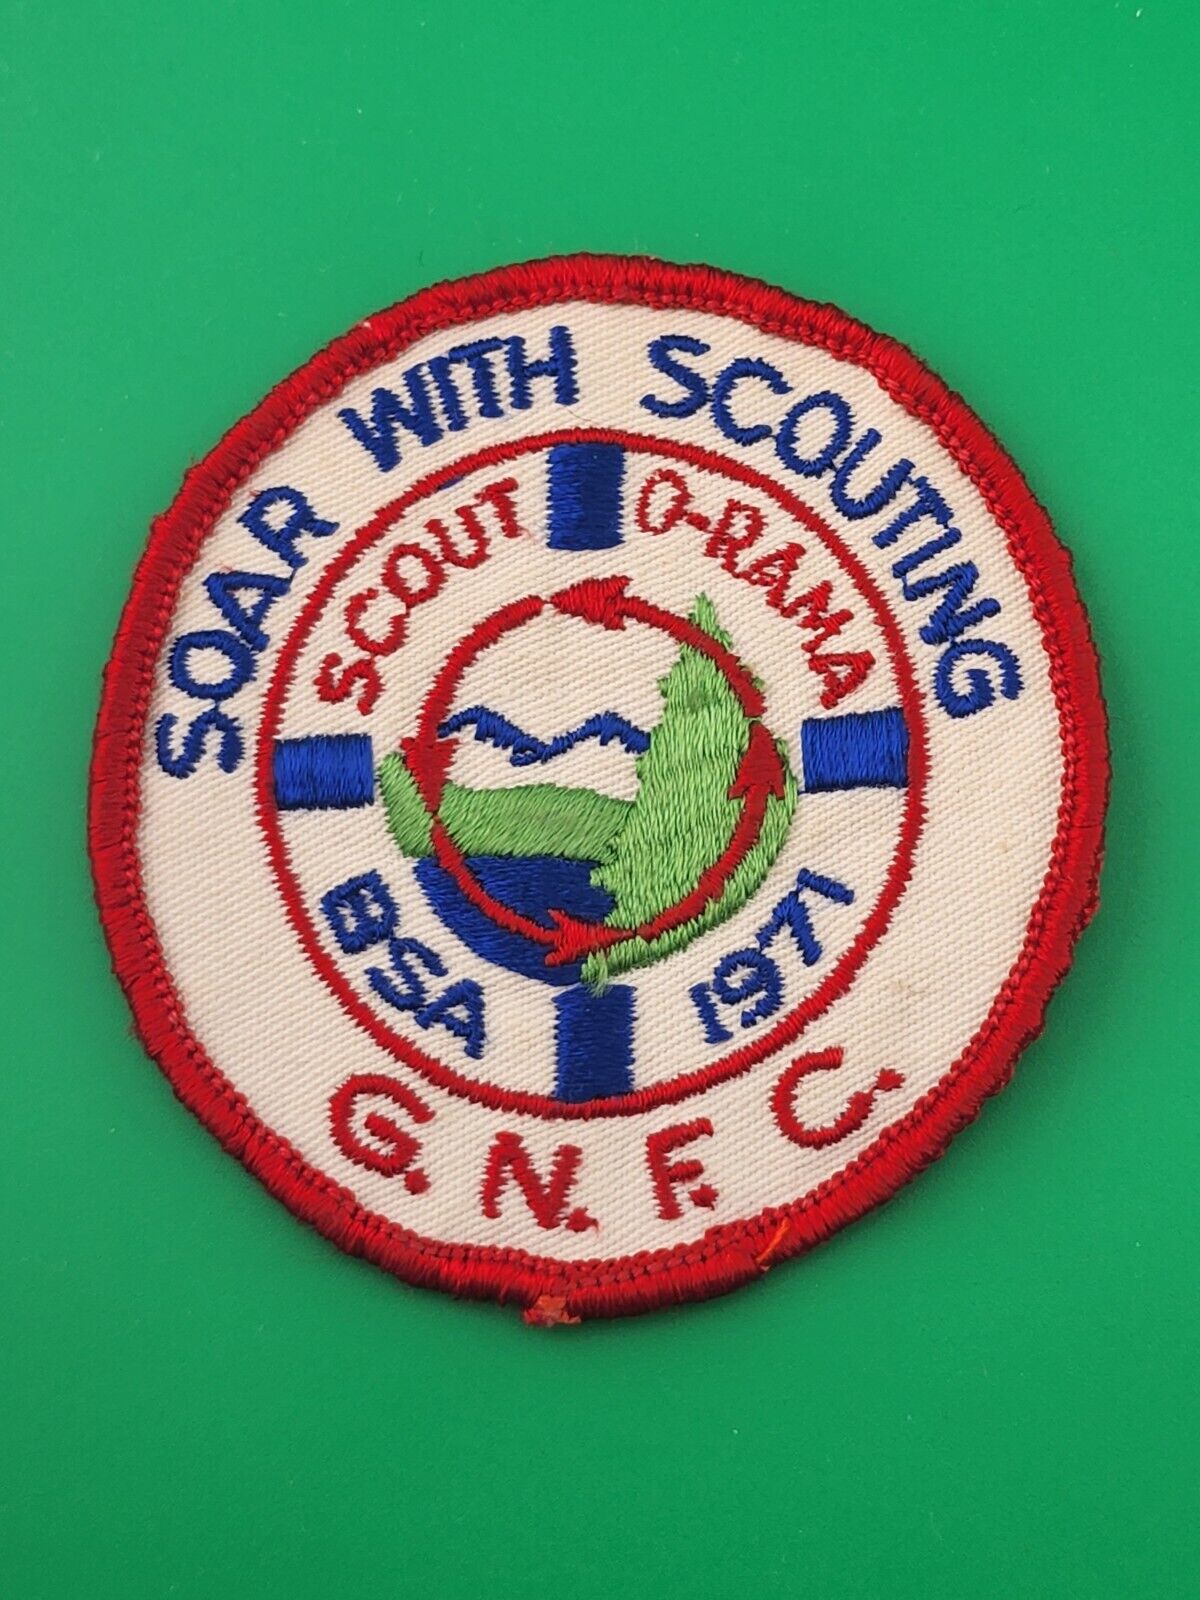 Soar With Scouting G.N.F.C. Scout-O-Rama BSA 1971Patch Boy Scouts Of America